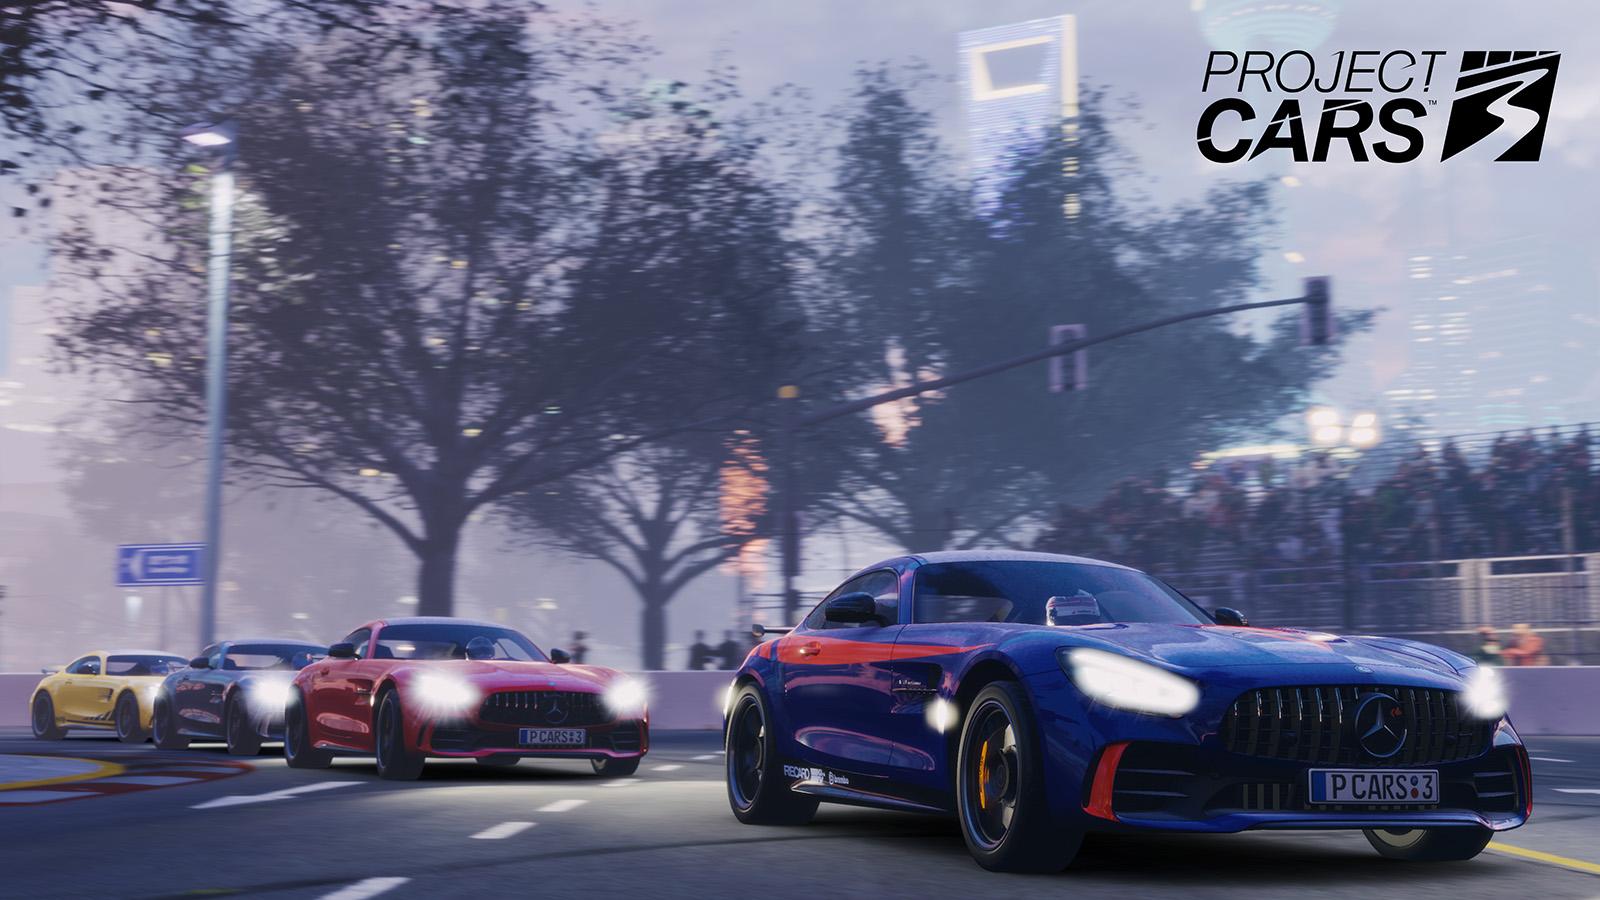 Project cars 3 track and car list